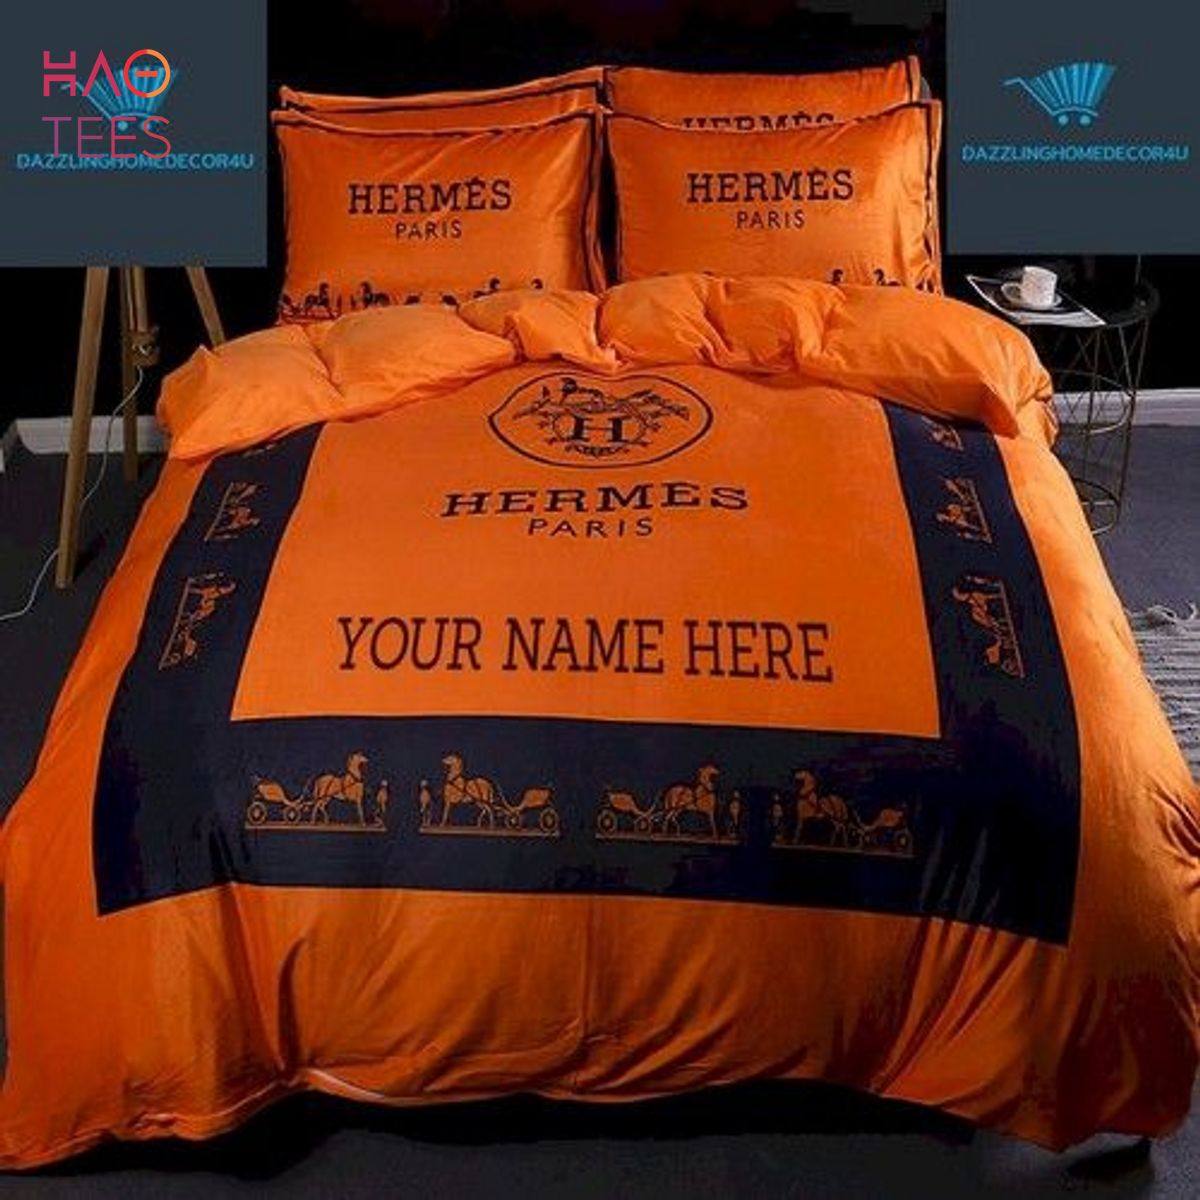 Hermes Paris Your Name Here Bedding Set Limited Edition